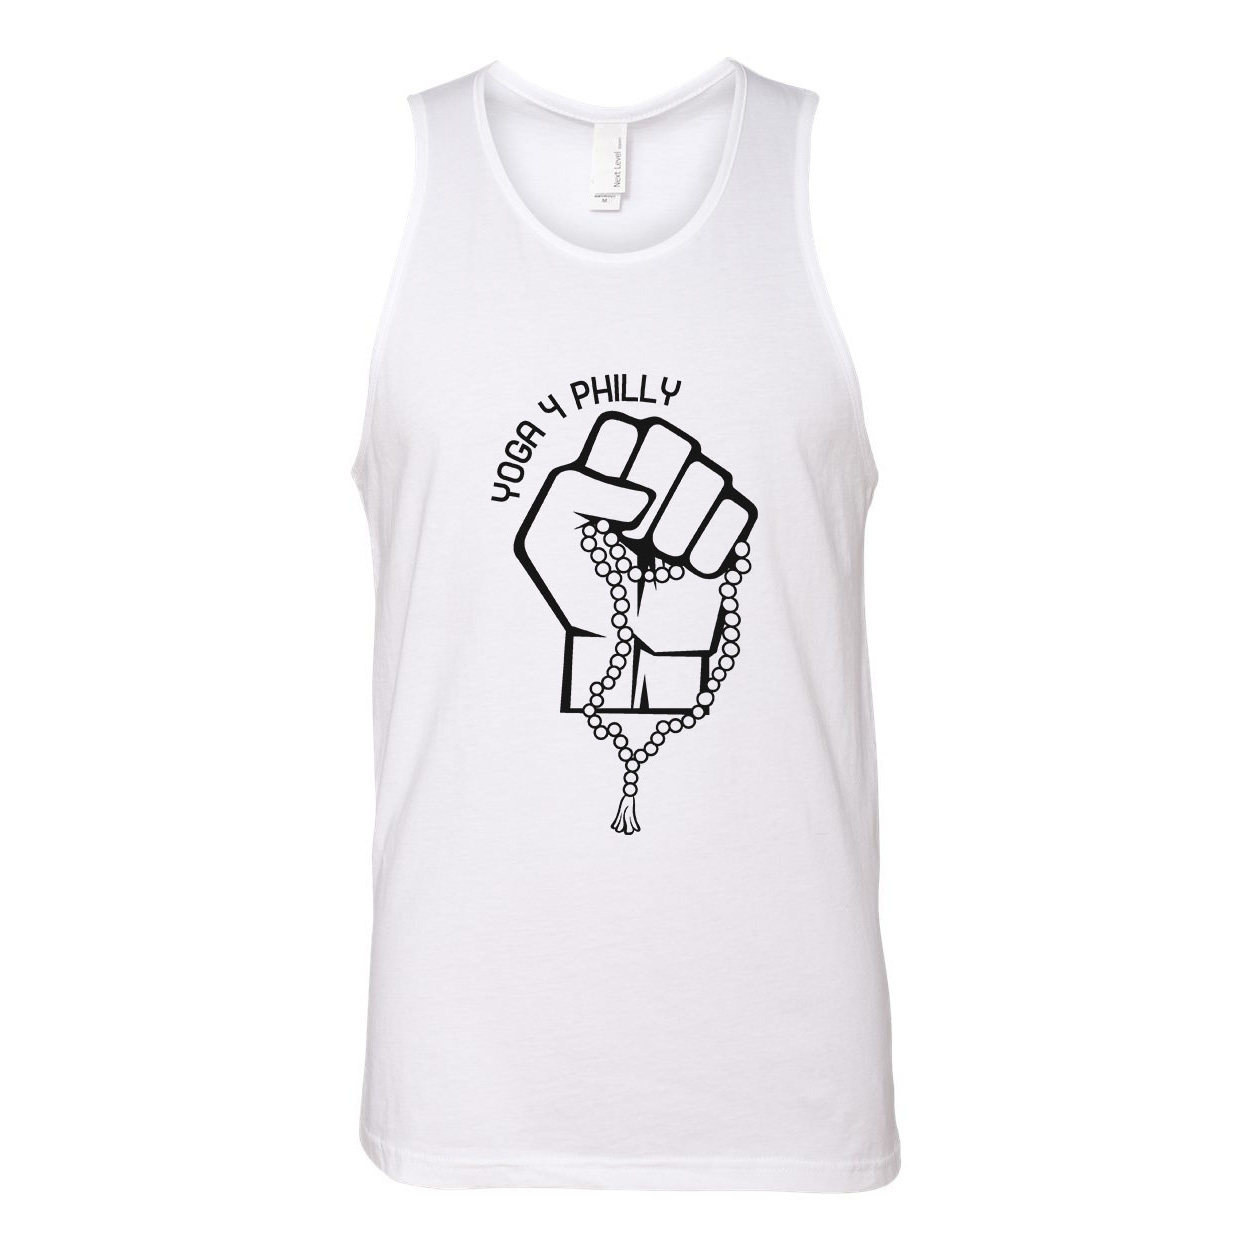 Yoga4Philly White Tank Top